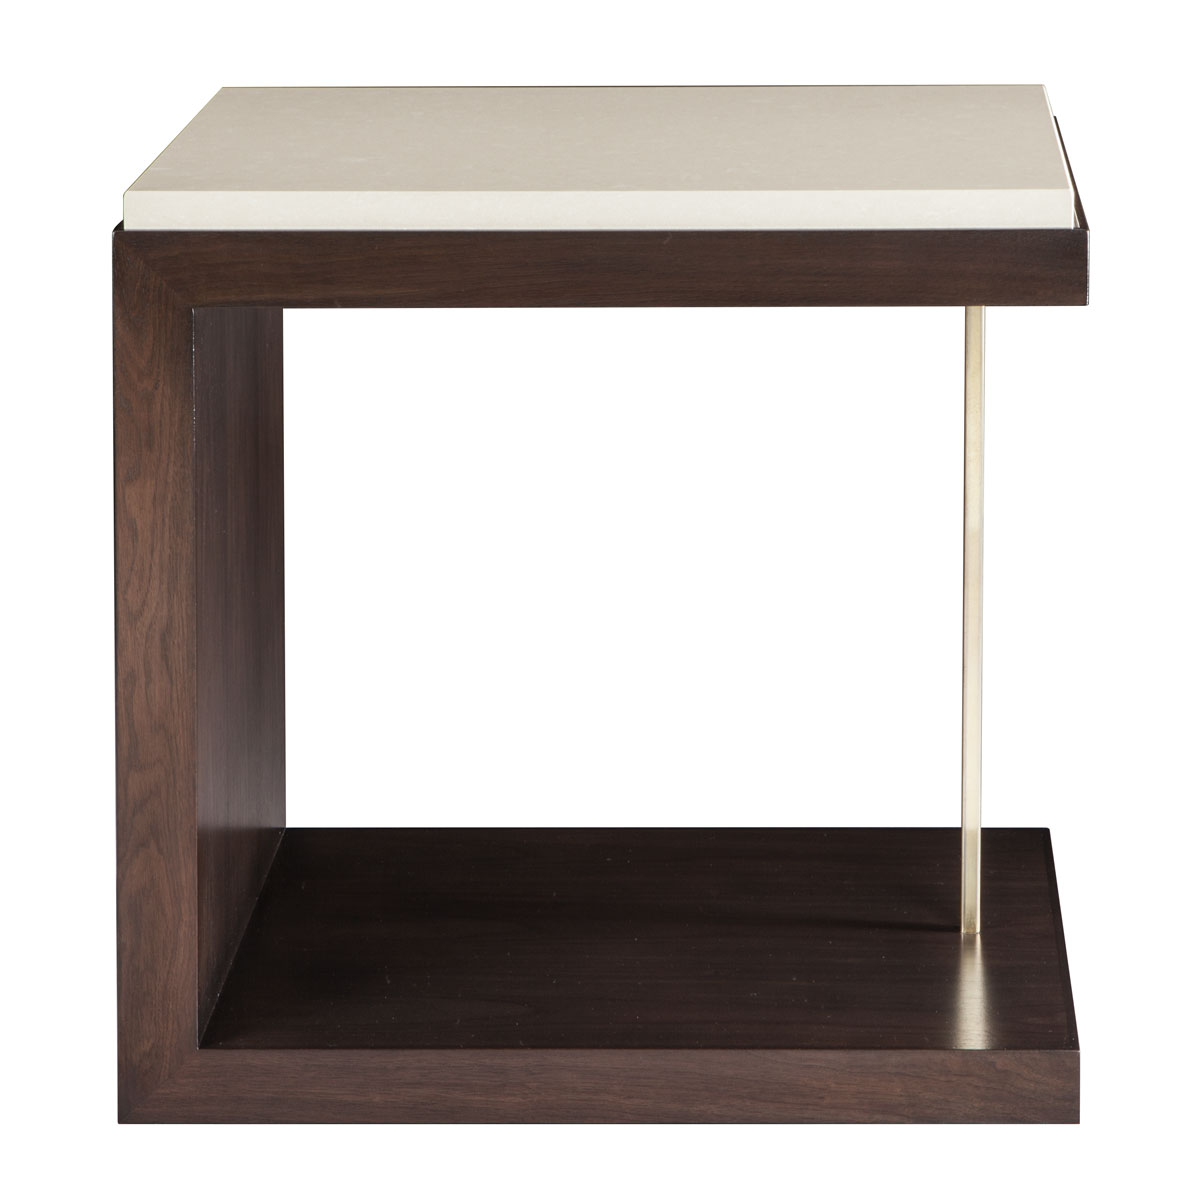 edward ferrell lewis mittman wood accent table side tables portable metal and glass small couches for rooms types furniture inch console entrance wall marble cube modern coffee